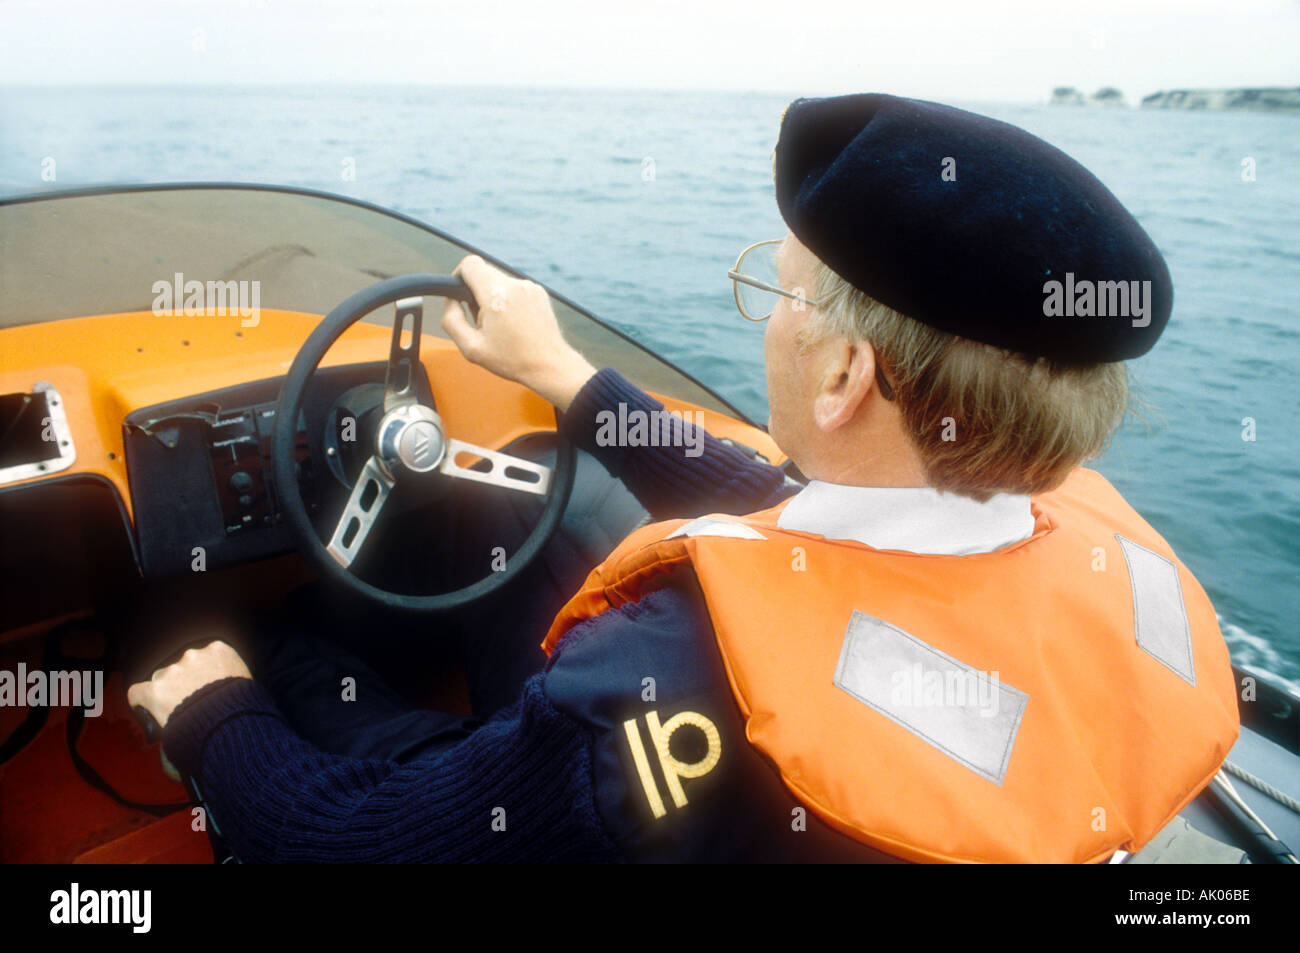 A Customs and Excise officer on patrol in an Avon Sea Rider rigid inflatable boat at Poole Harbour Dorset England UK Stock Photo